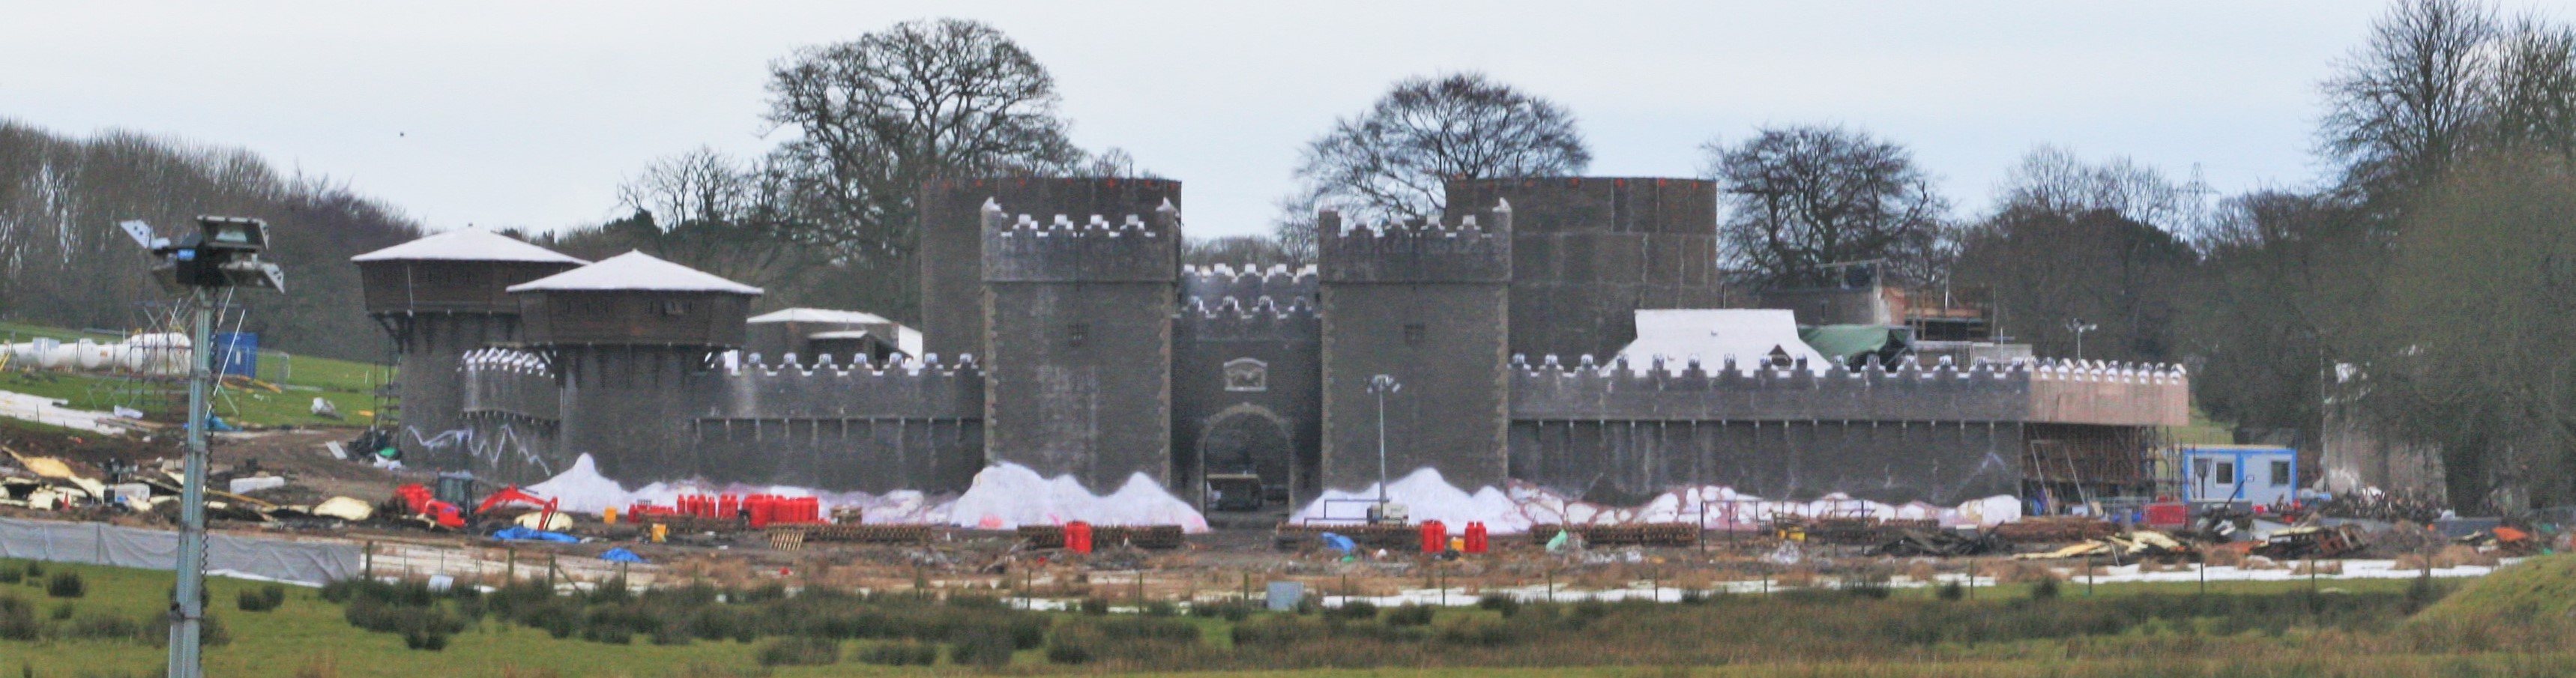 We reported on the much-expanded Winterfell set during filming